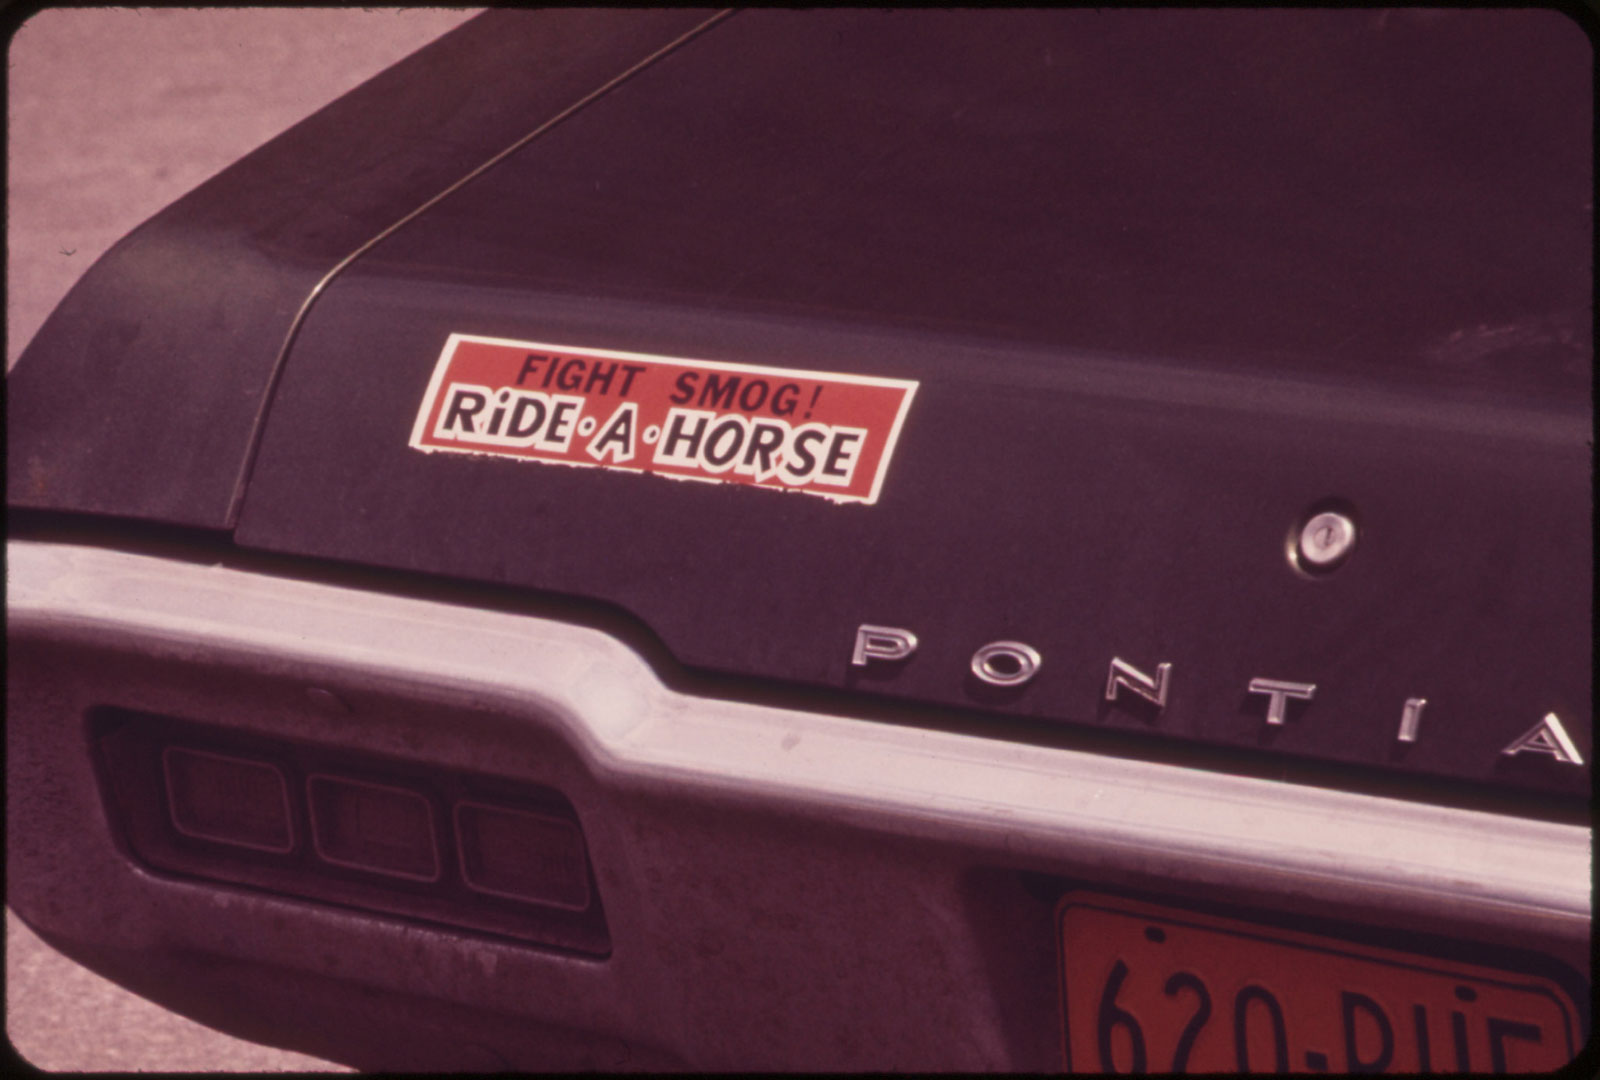 1973 photo of close up of rear end of Pontiac car with bumper sticker reading "Fight smog! Ride a horse"